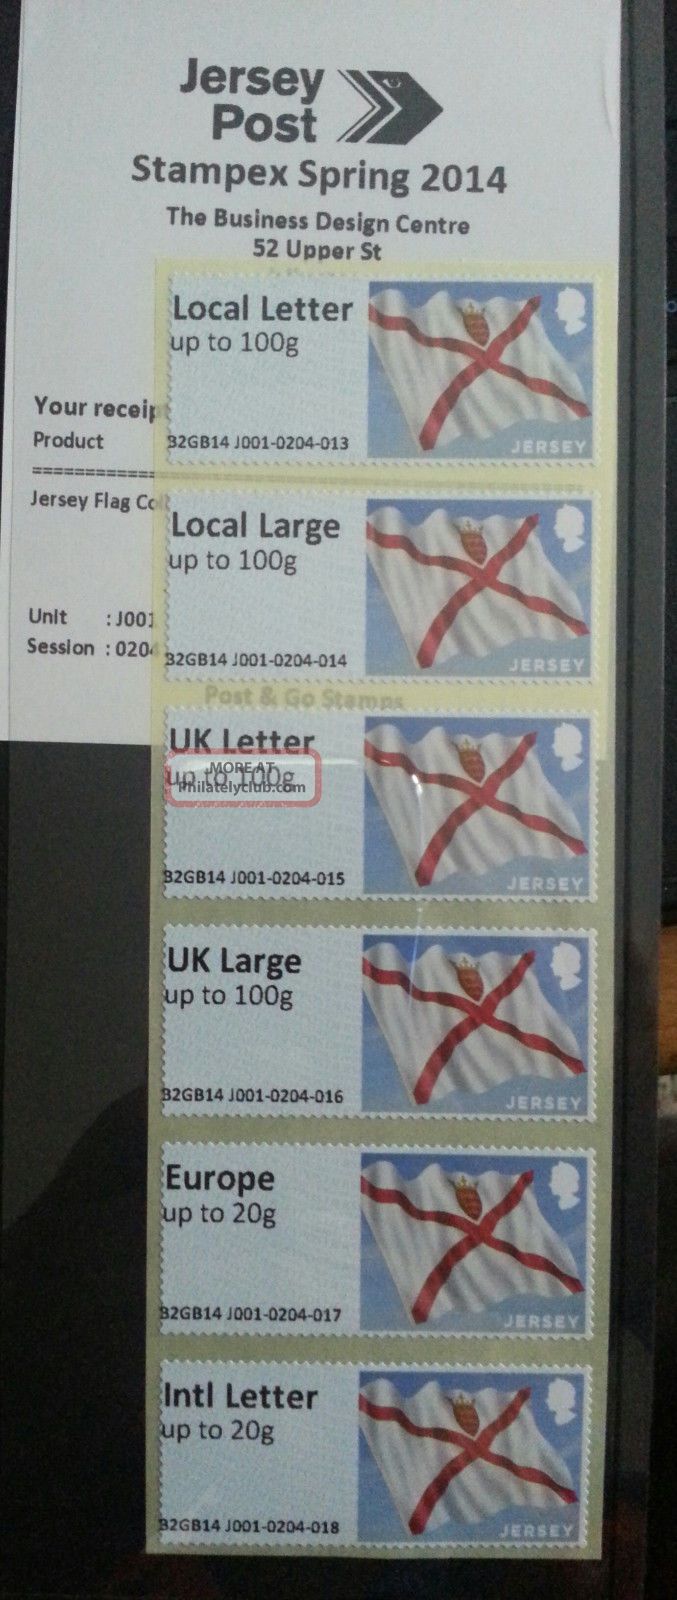 Jersey 6v Post N Go Collectors Strip With Jersey Flag Date Of Issue 19 Feb 2014 Topical Stamps photo